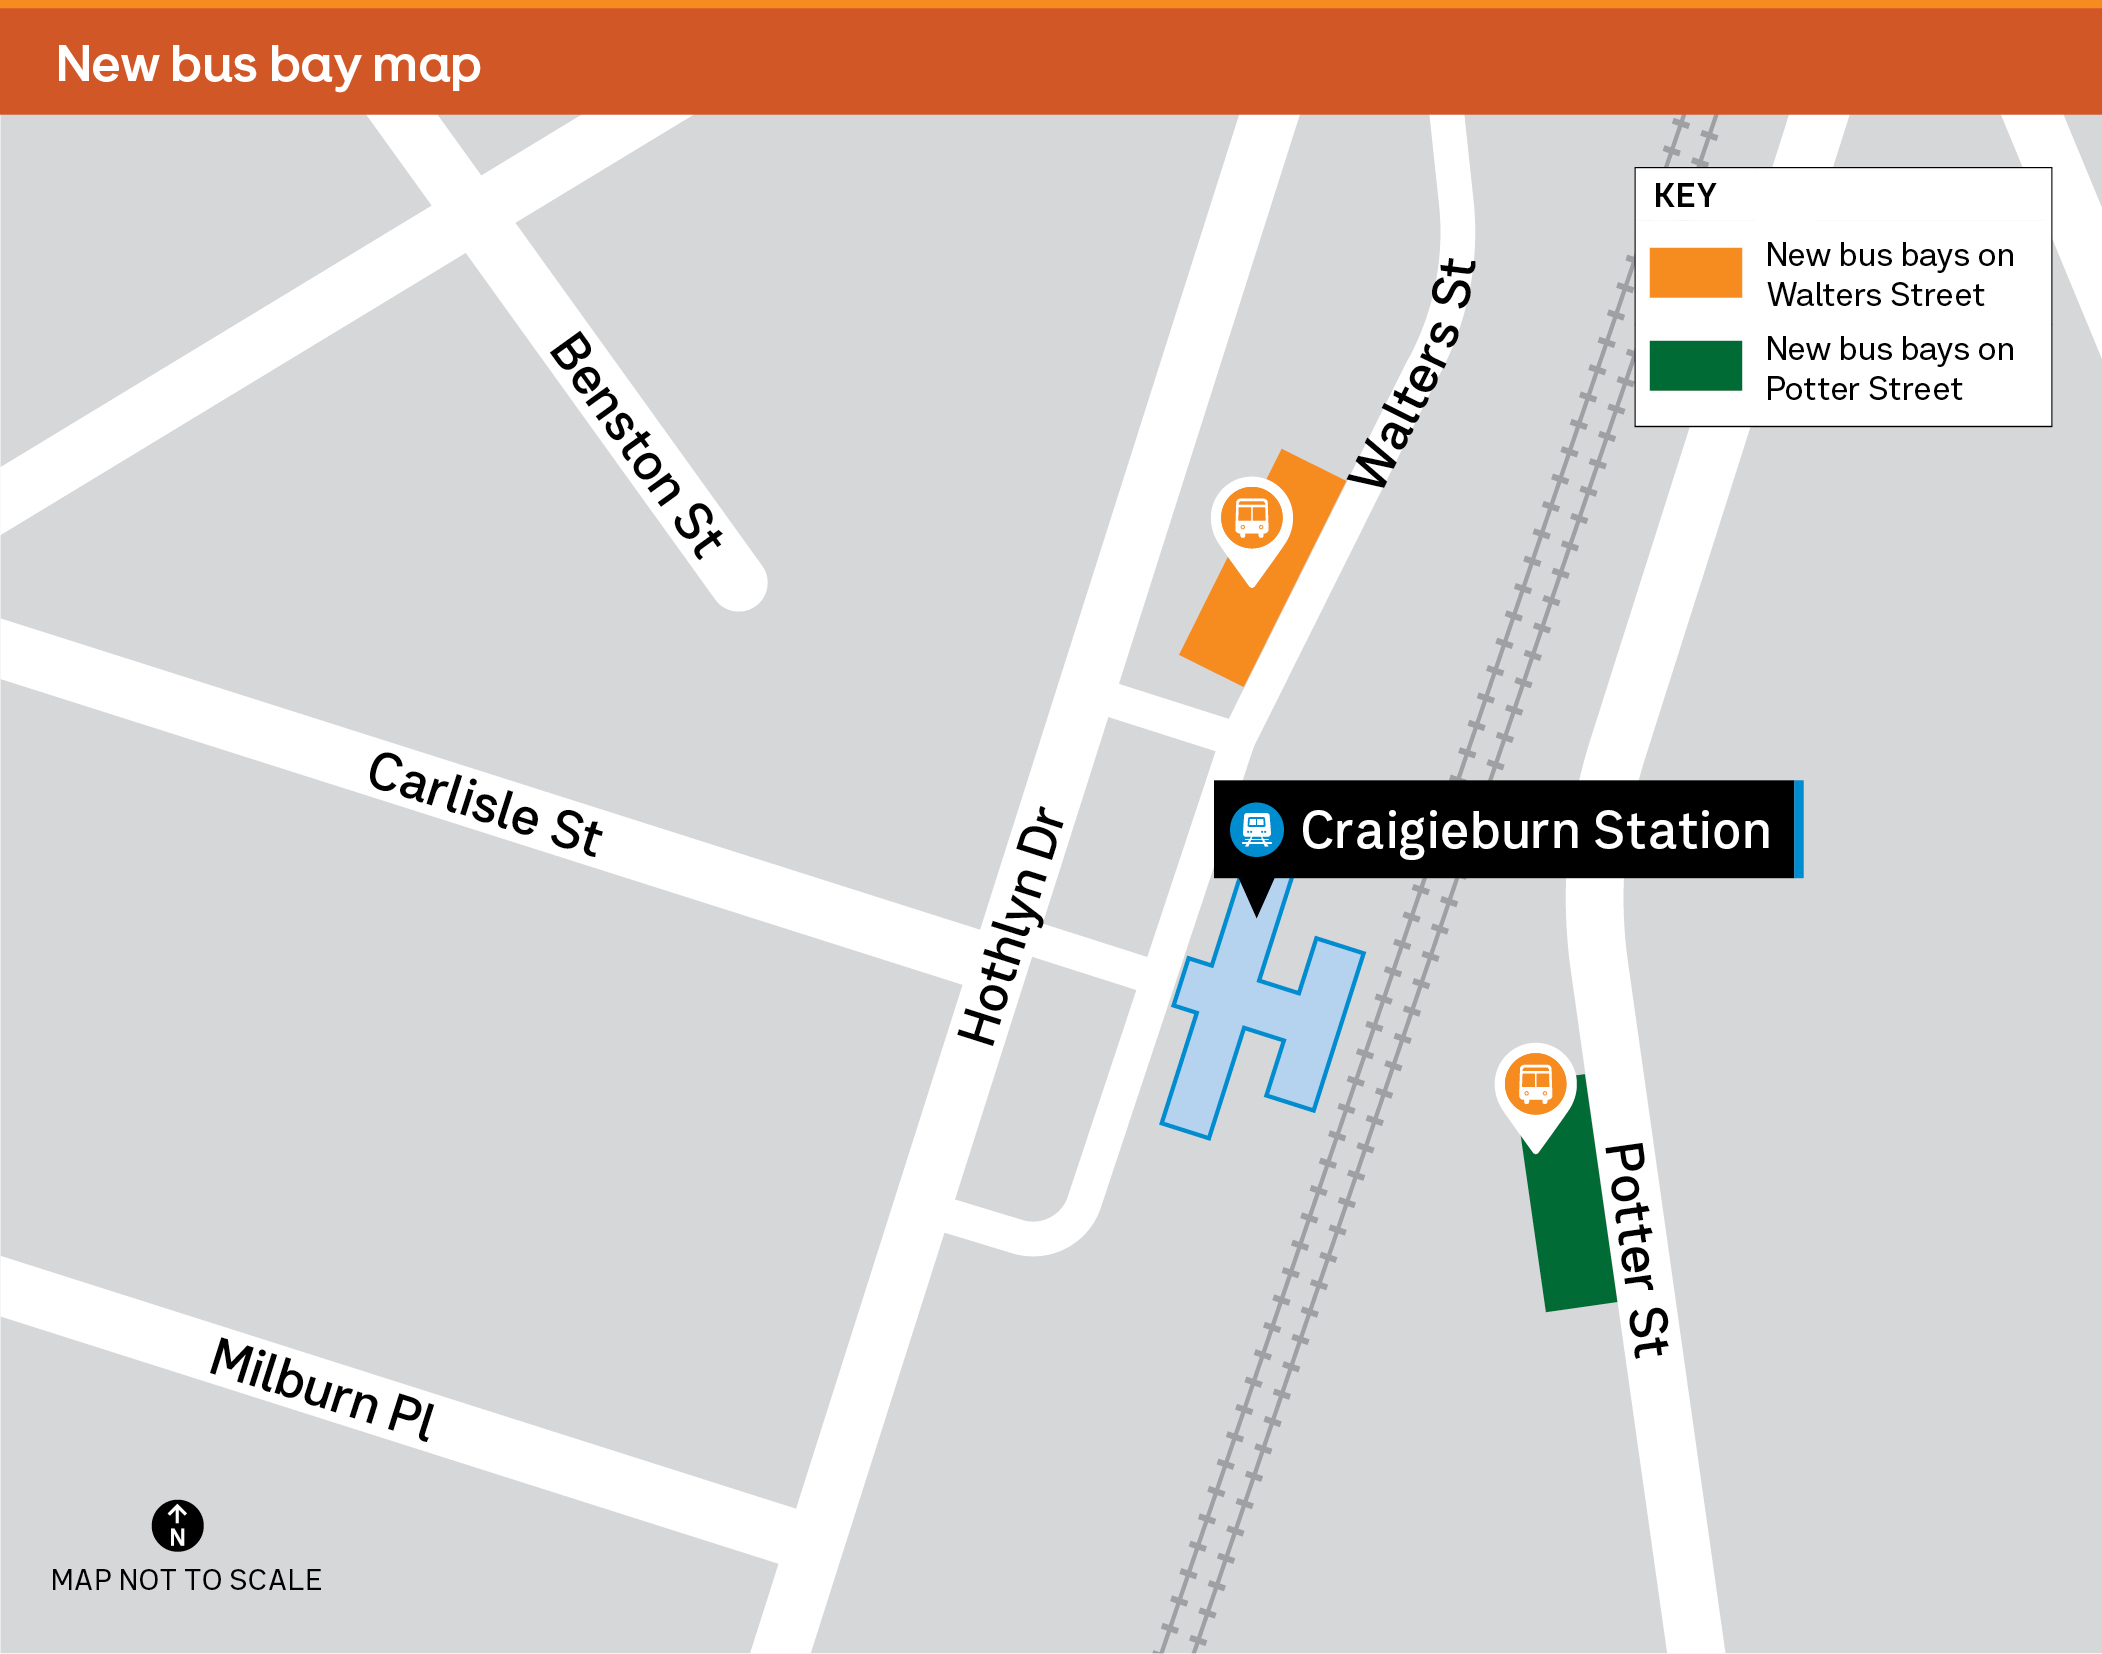 Map of Cragieburn Station showing location of new bus bays